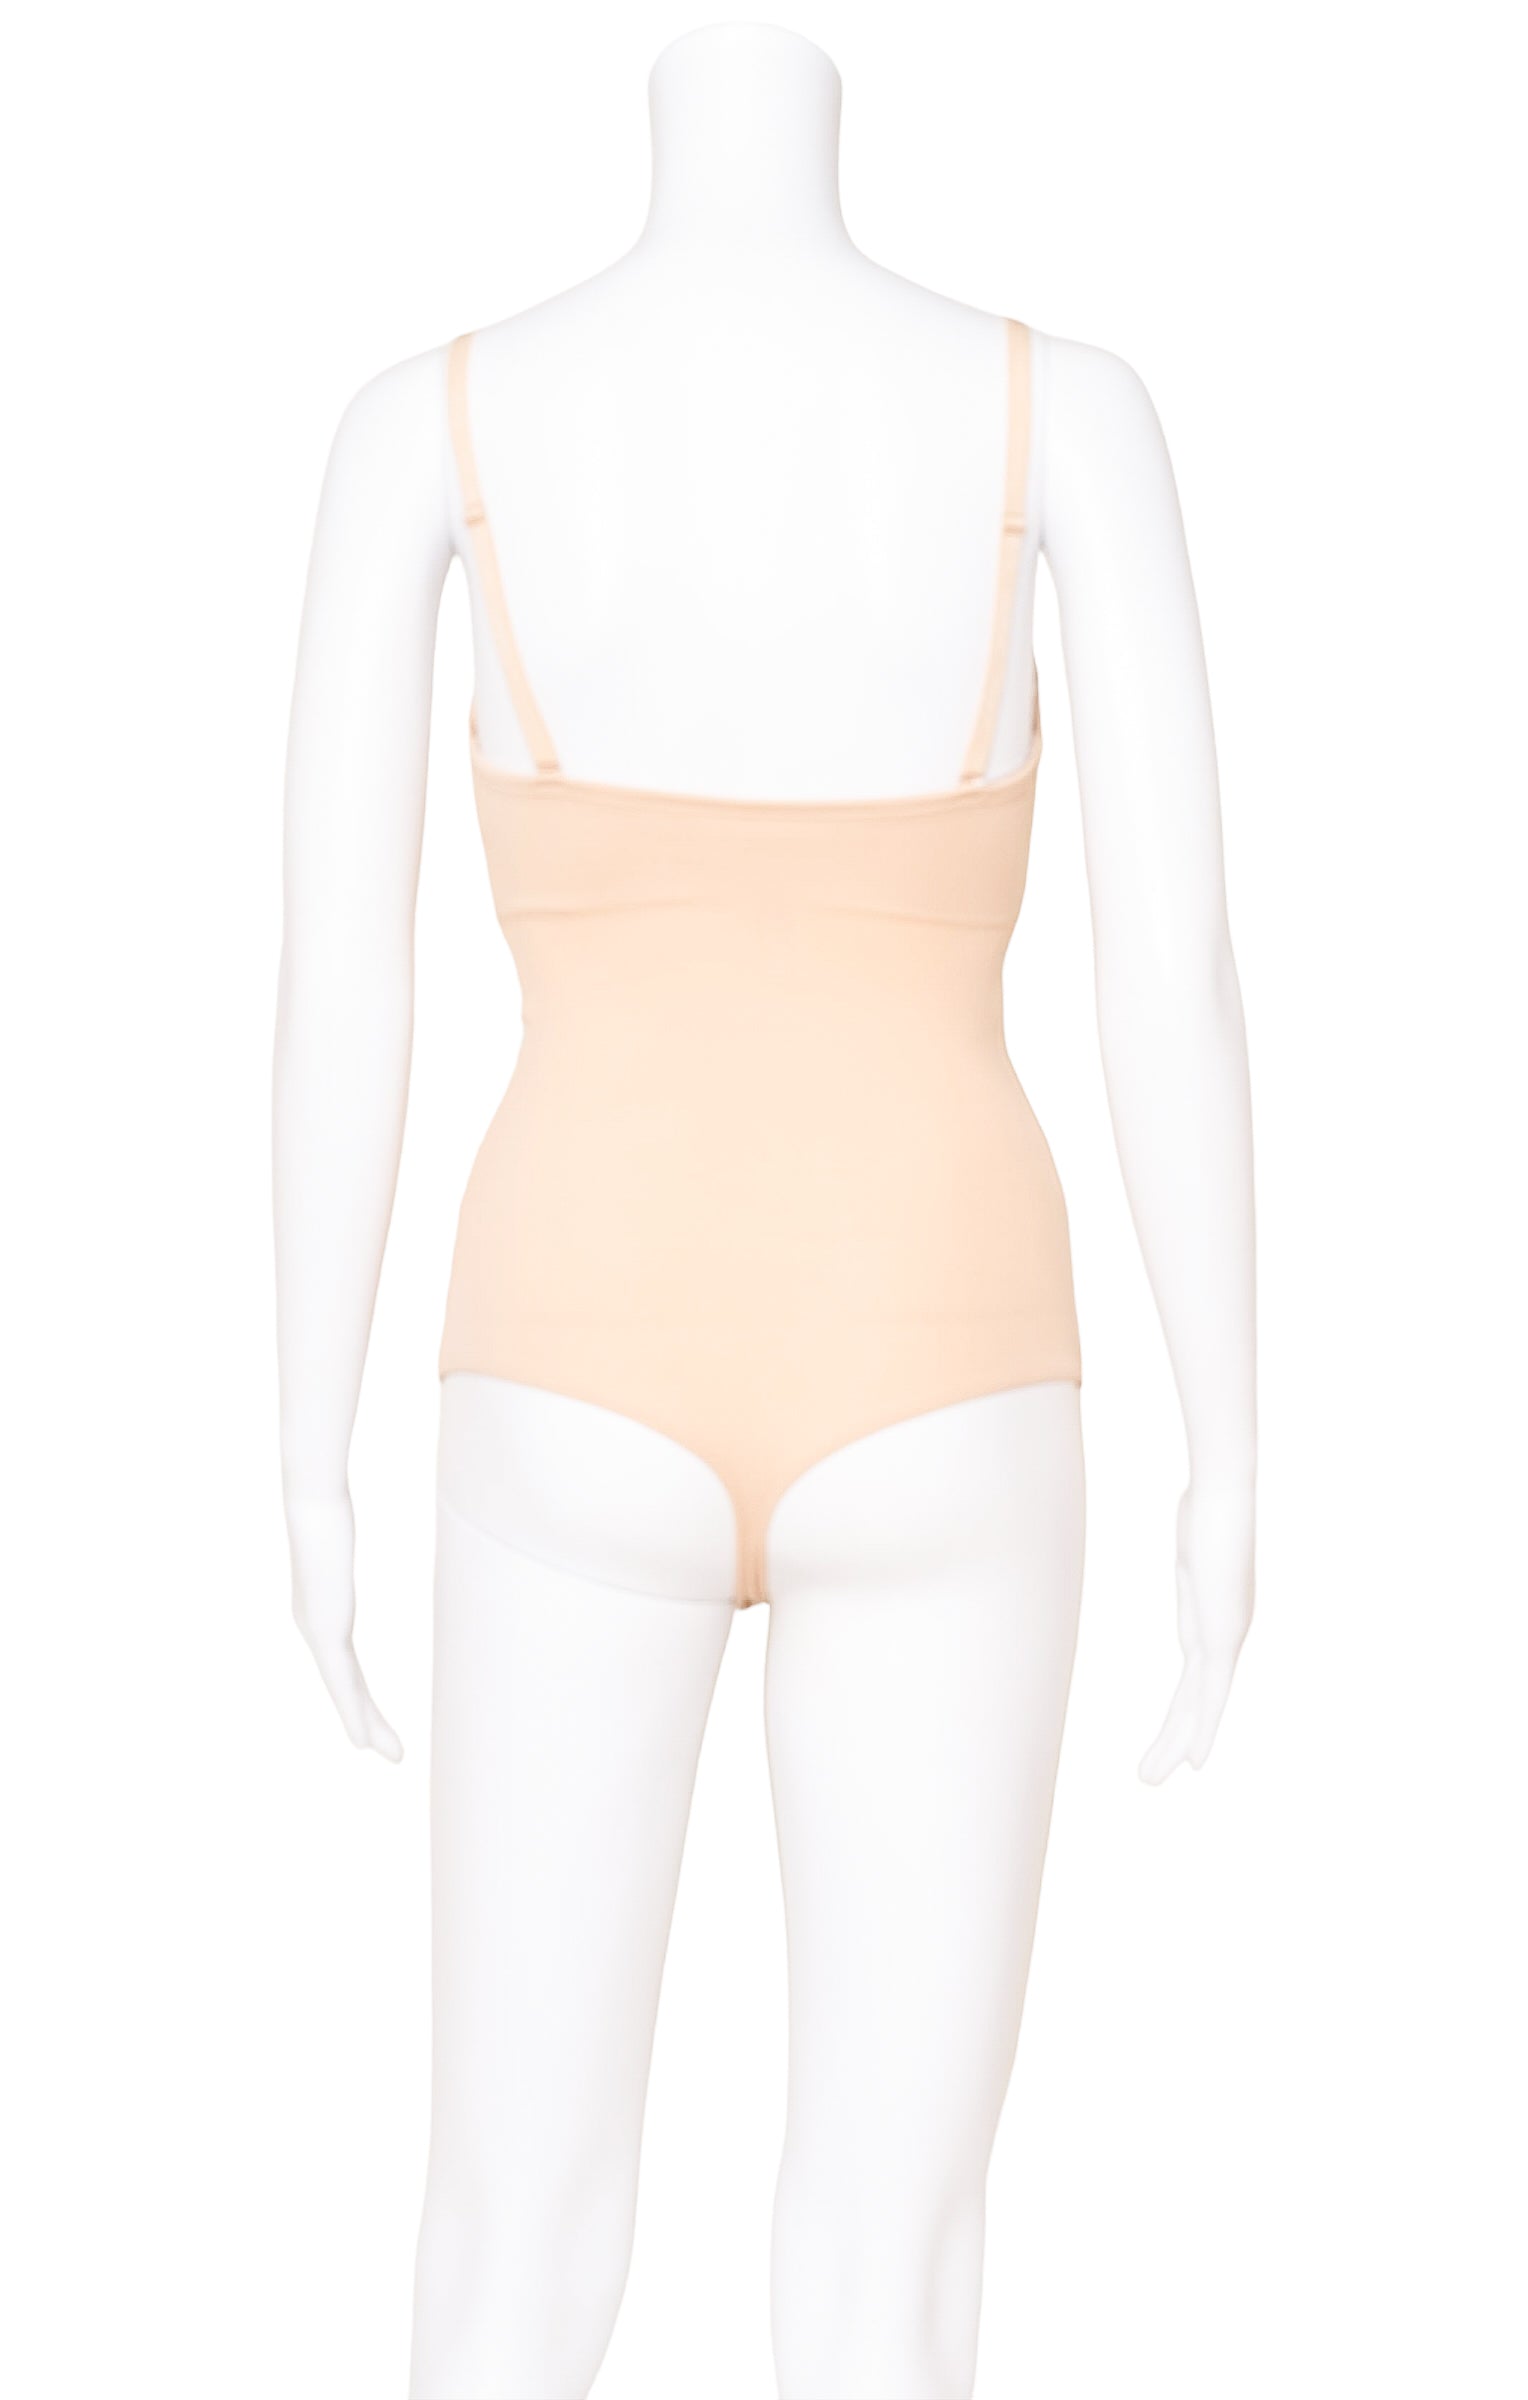 WOLFORD (NEW) with tags Bodysuit / Shapewear Size: M / D Cup